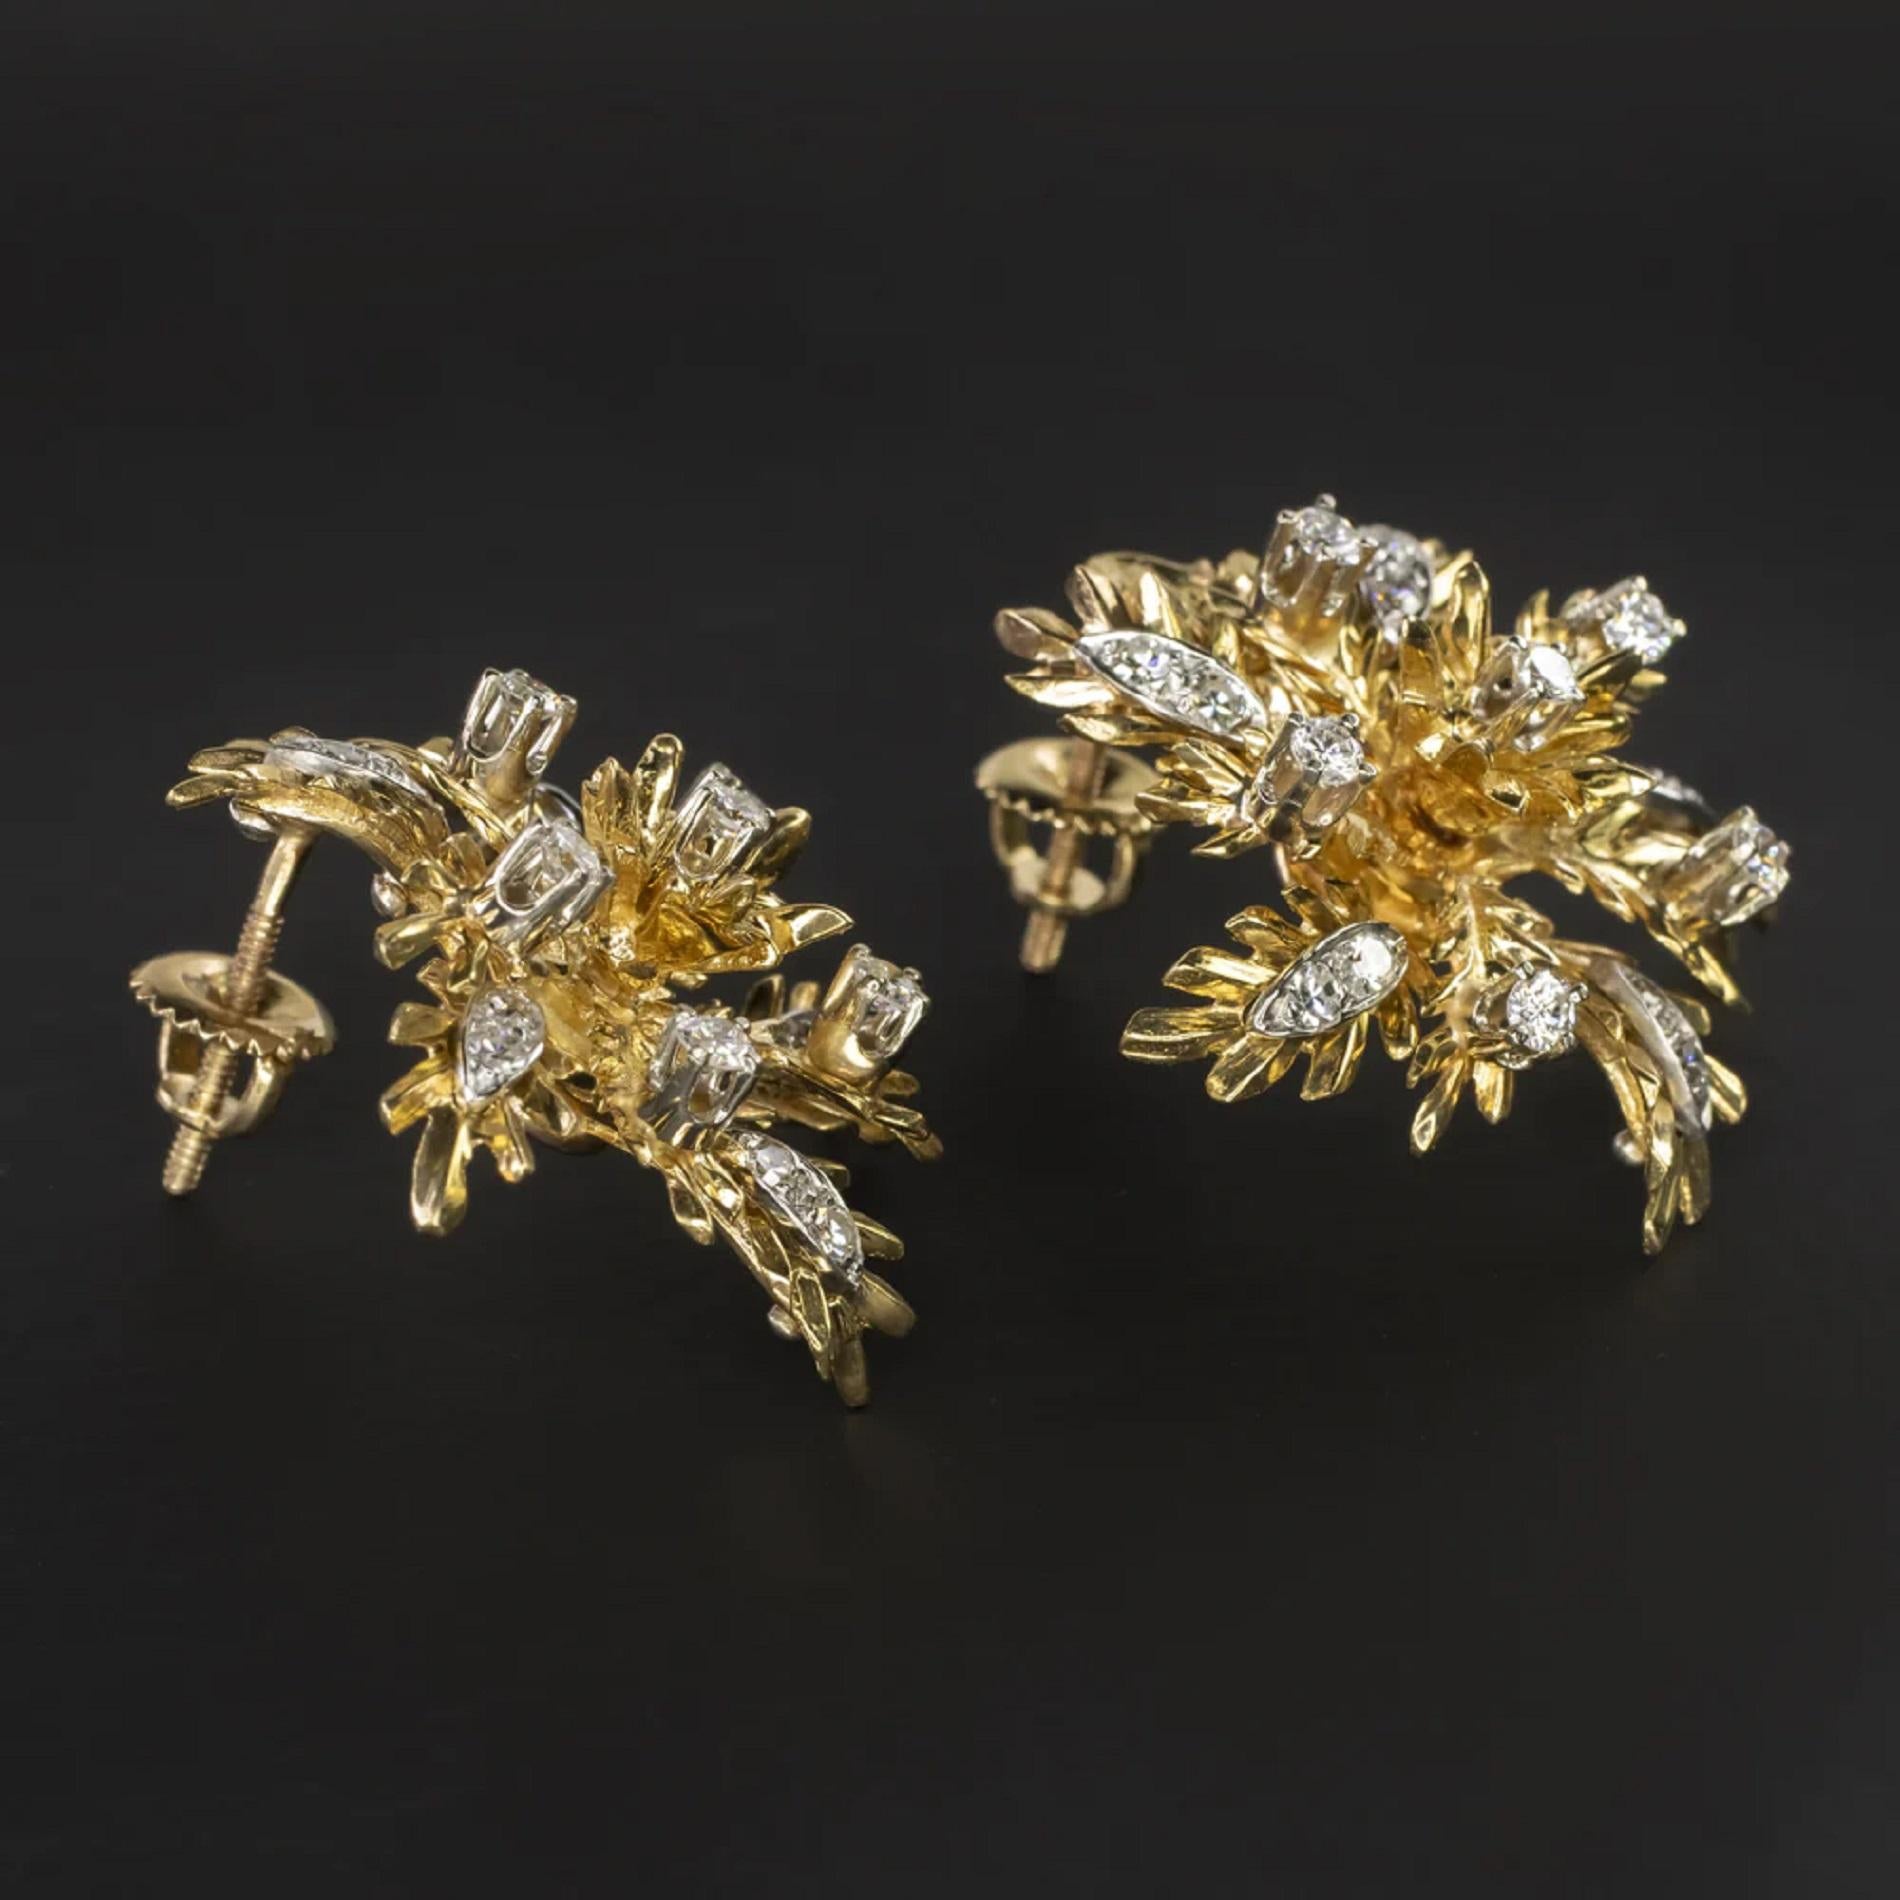 Modern Authentic 50's Vintage 18 Carat Yellow Gold Diamond Earrings For Sale